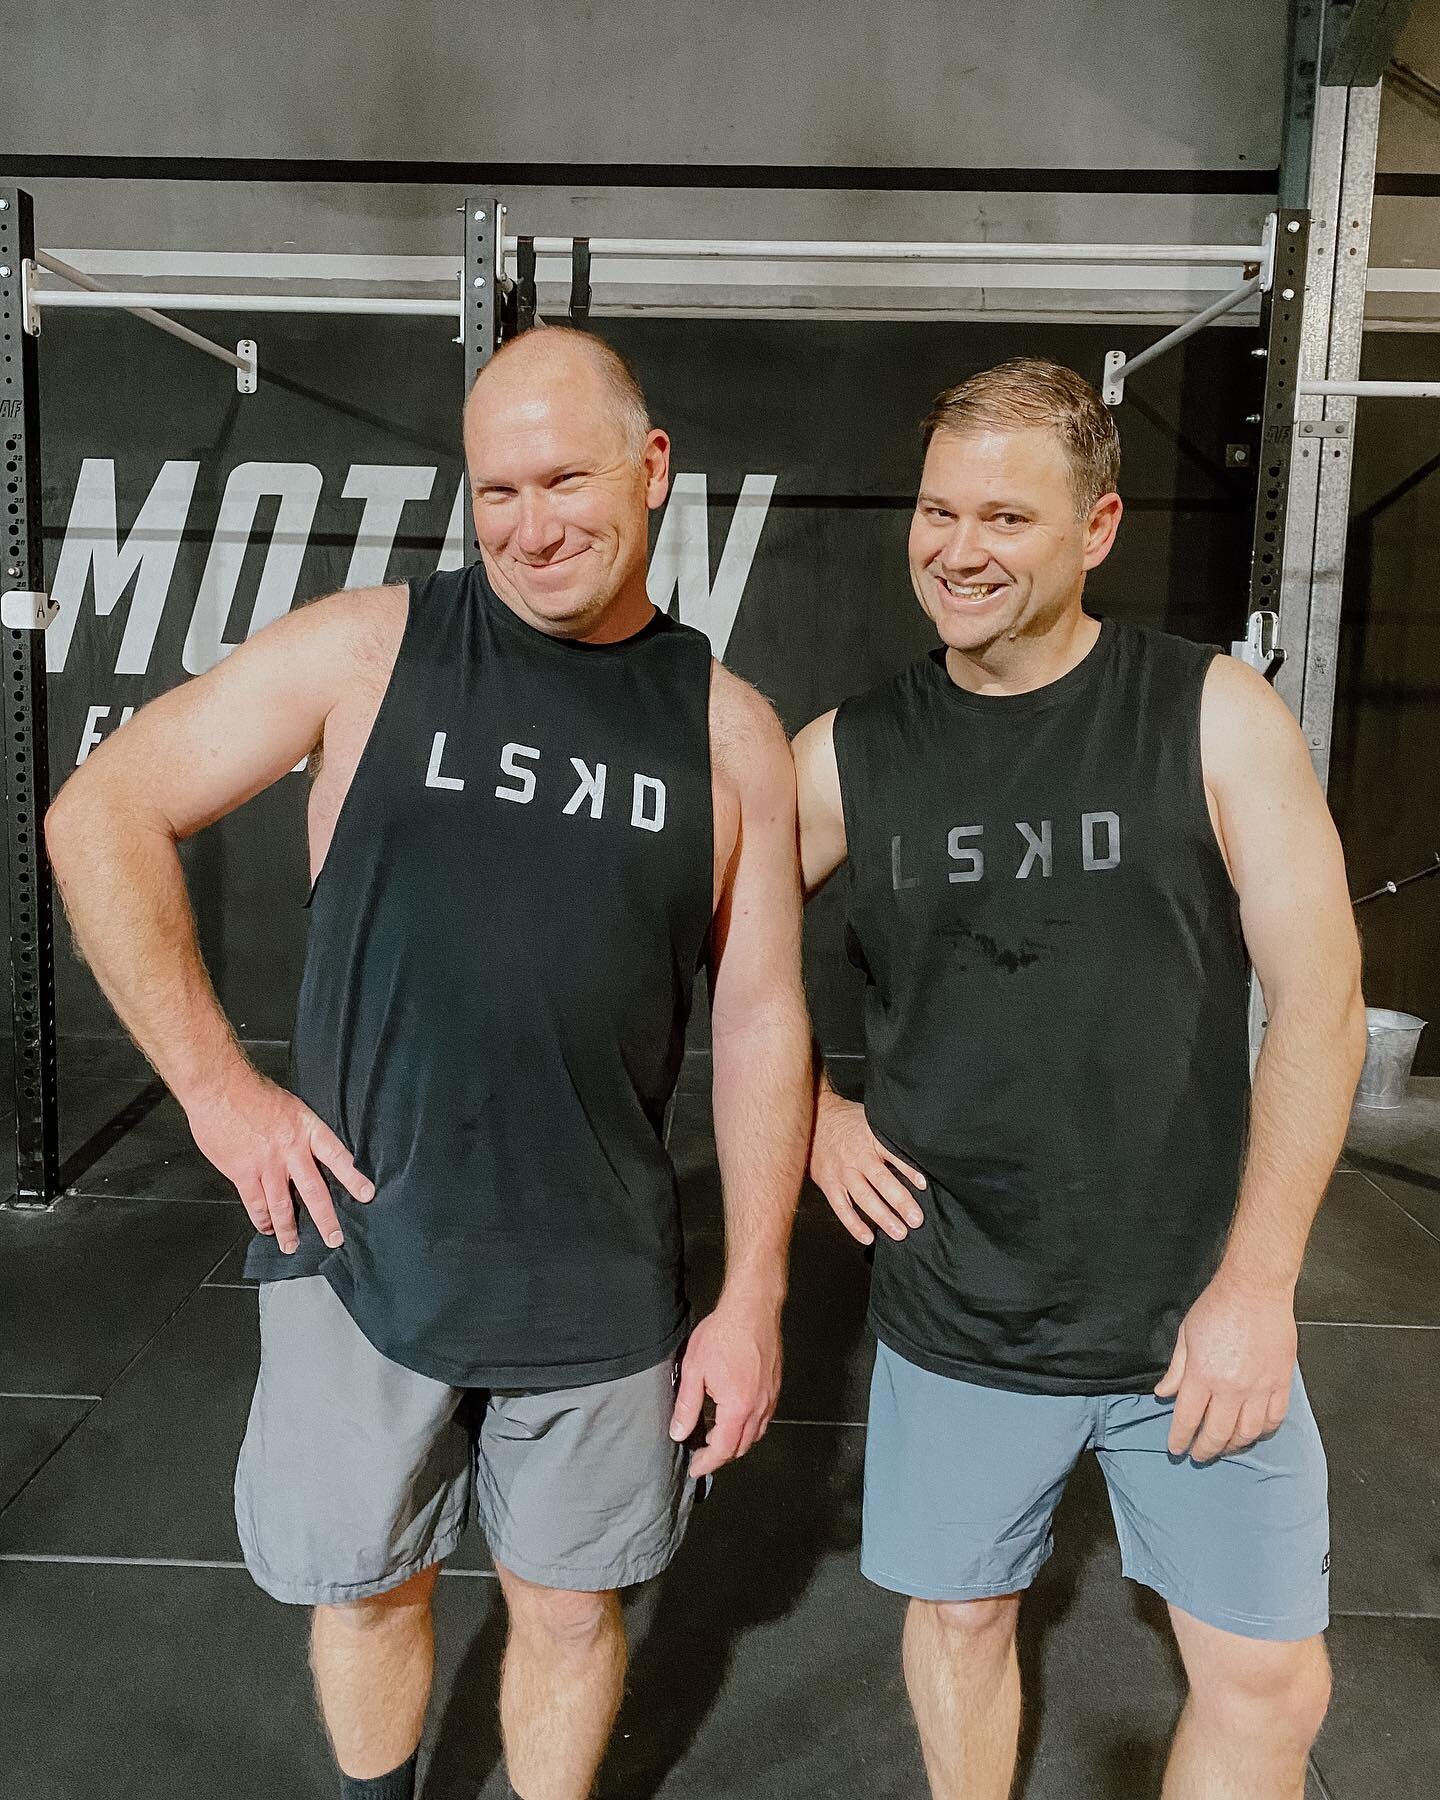 &ldquo;What are you wearing to the gym in the morning?&rdquo;
&ldquo;I think my LSKD shirt, shorts + Metcons&rdquo;
&ldquo;Okay, that will be perfect for the partner workout!&rdquo; 📞